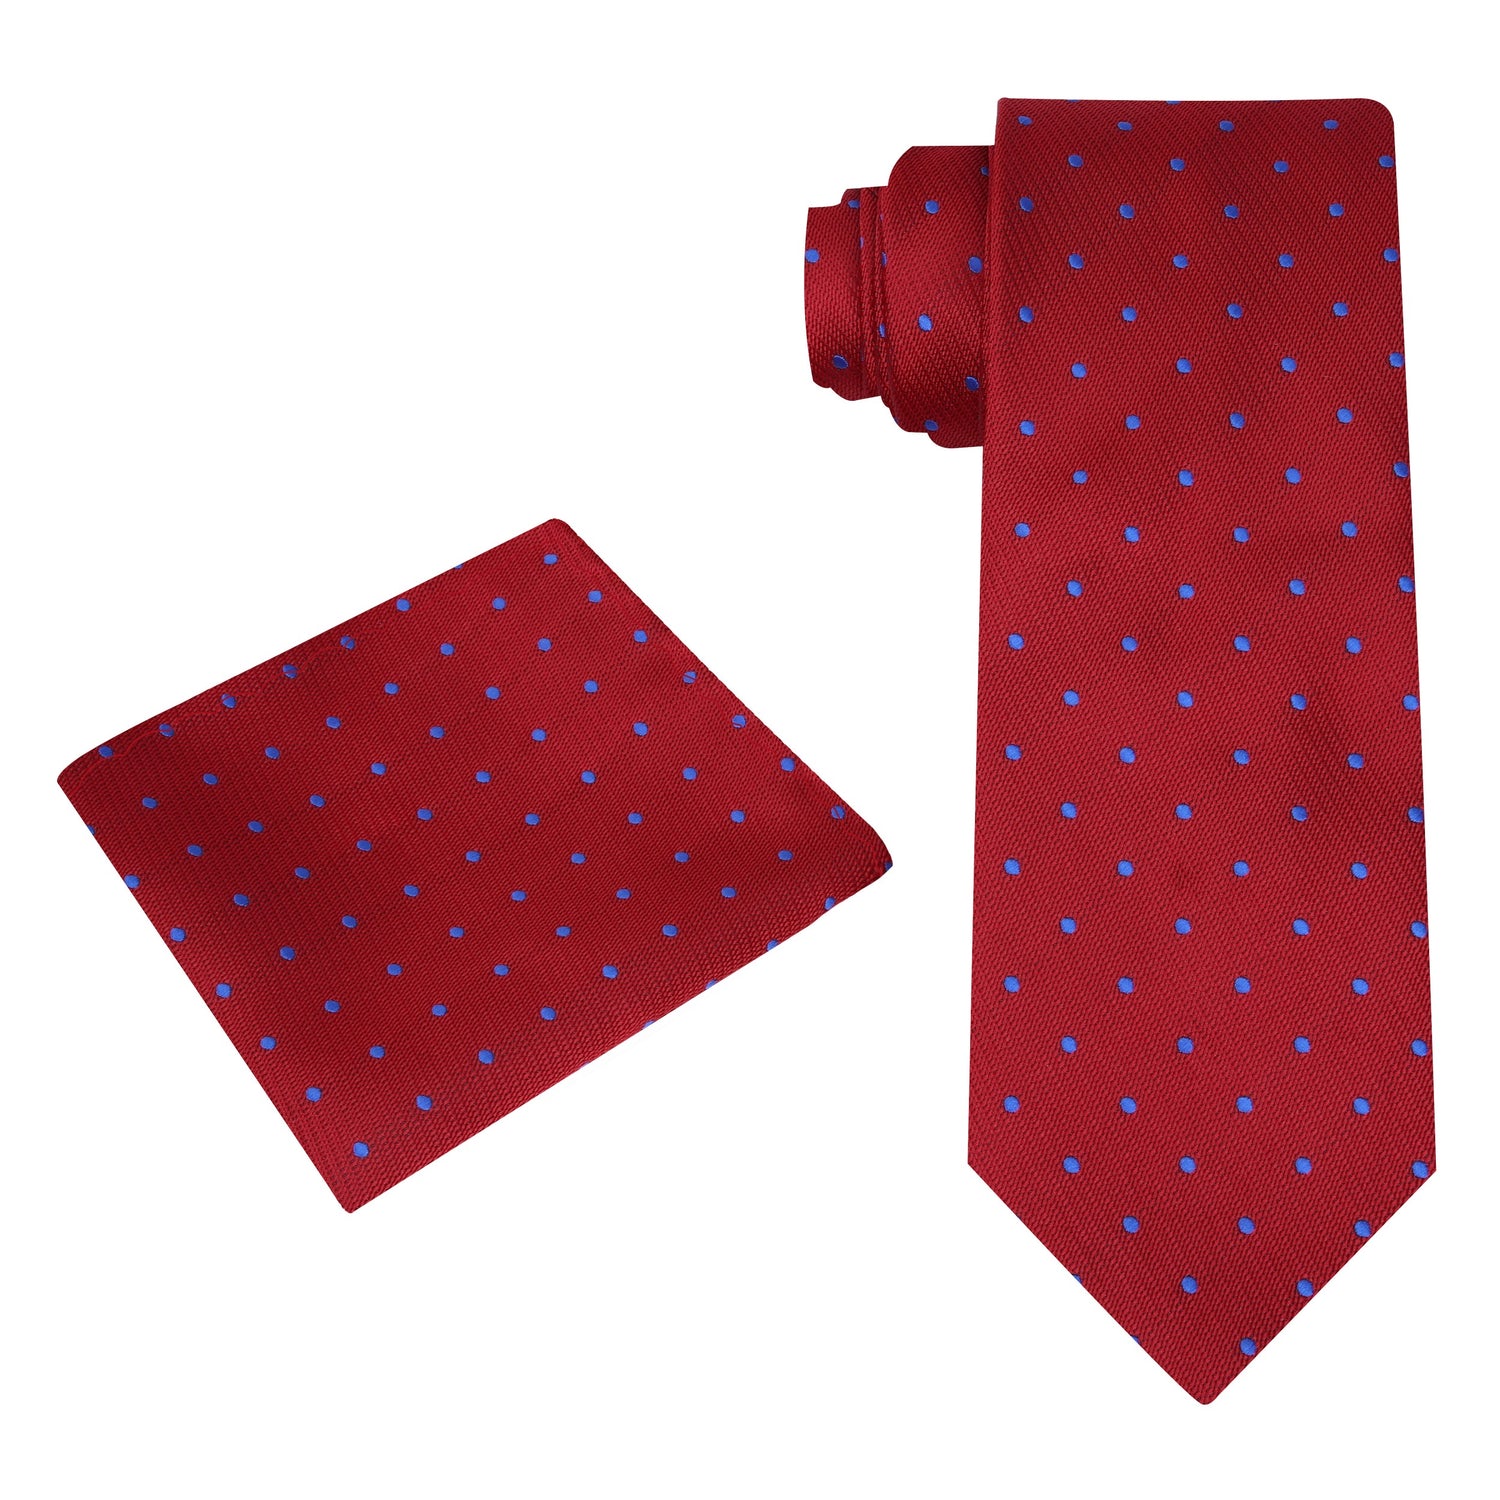 Alt View: Red Blue Dots Tie and Square